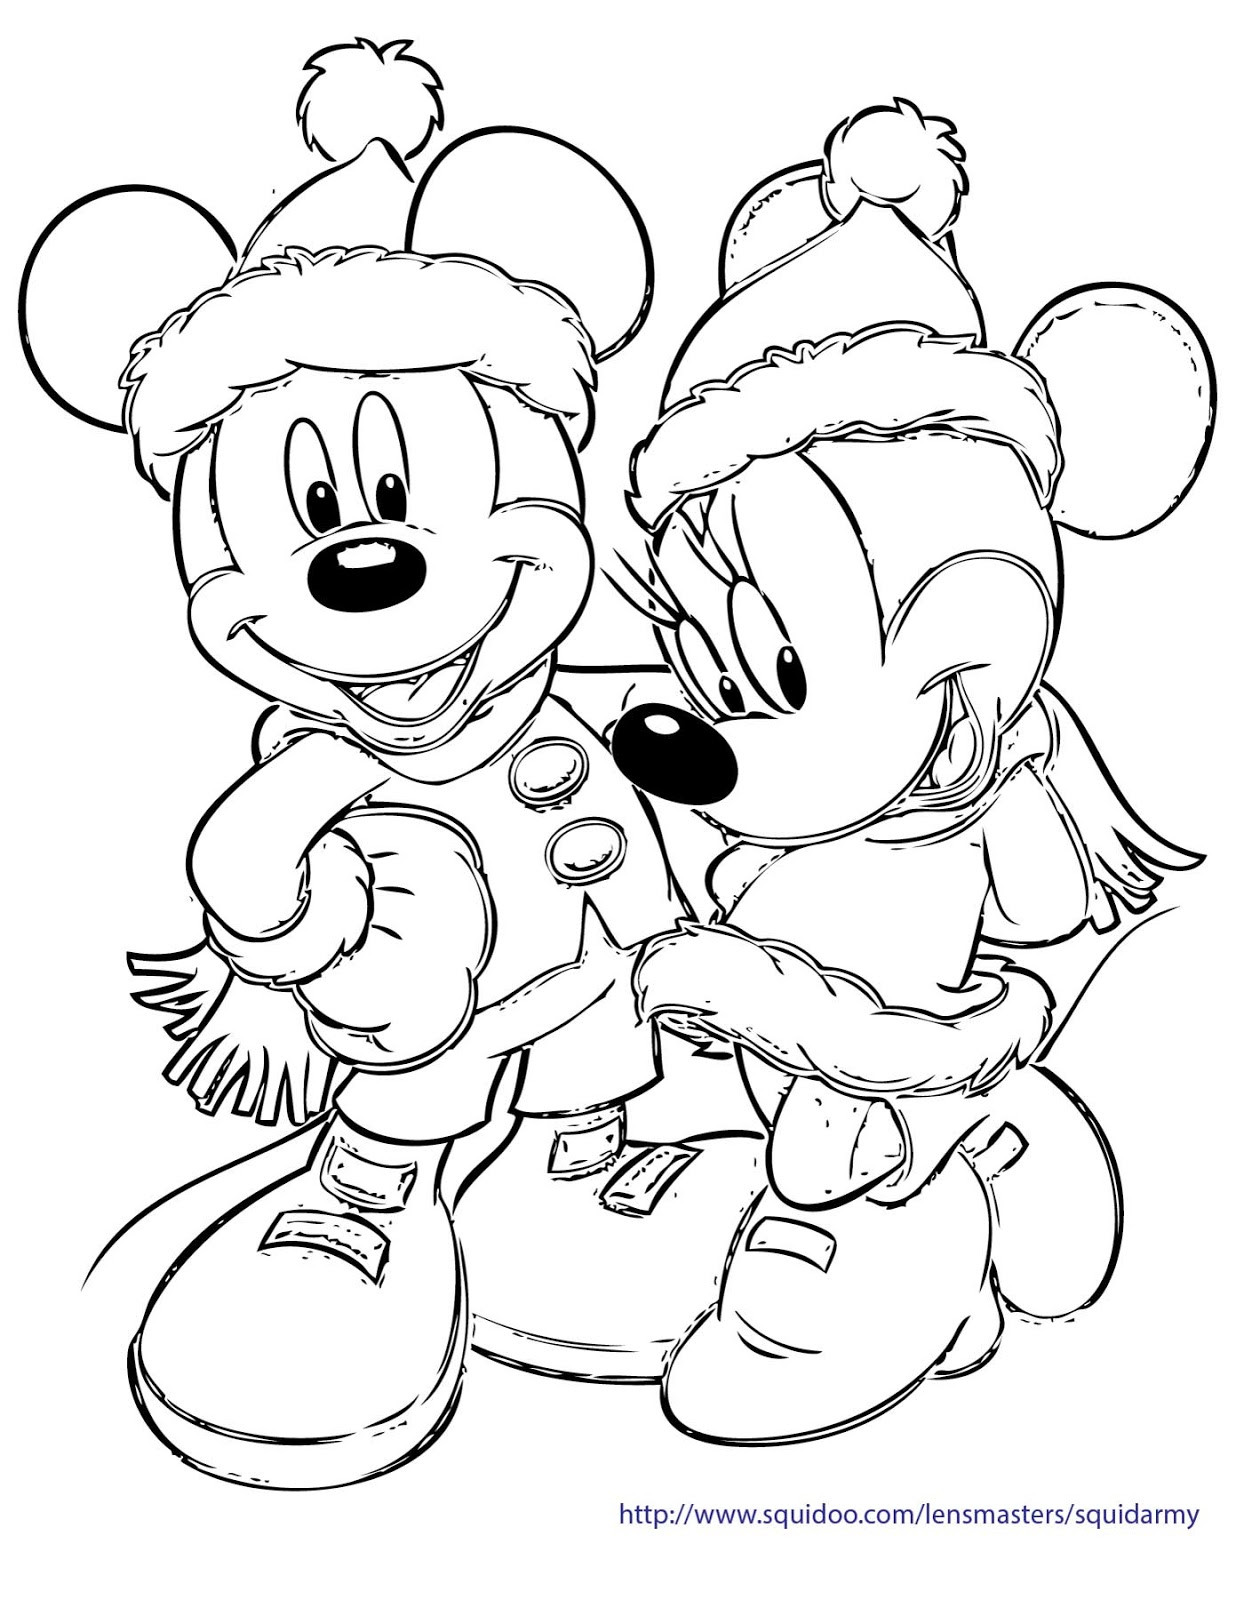 Disney Coloring Pages Free
 Disney Christmas Coloring Pages – Happy Holidays